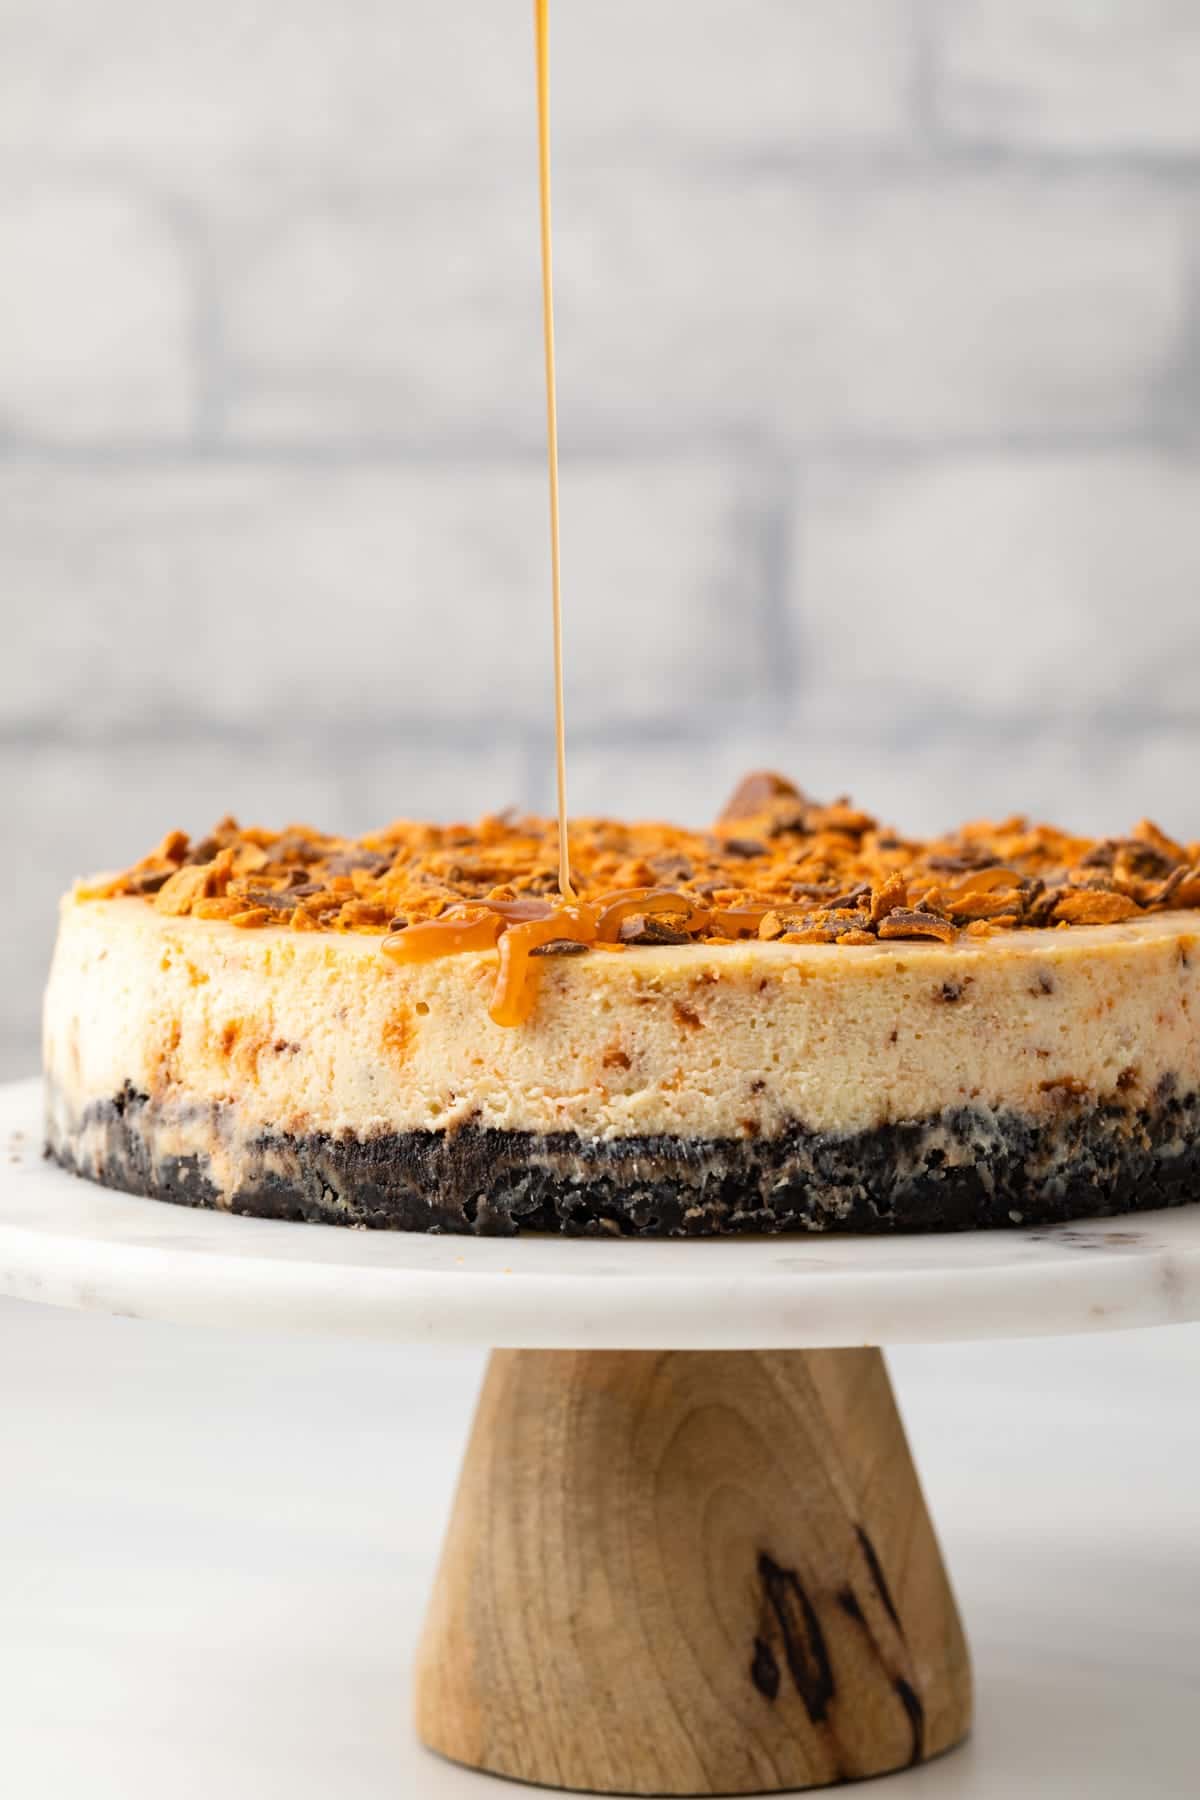 Butterfinger cheesecake on cake stand.